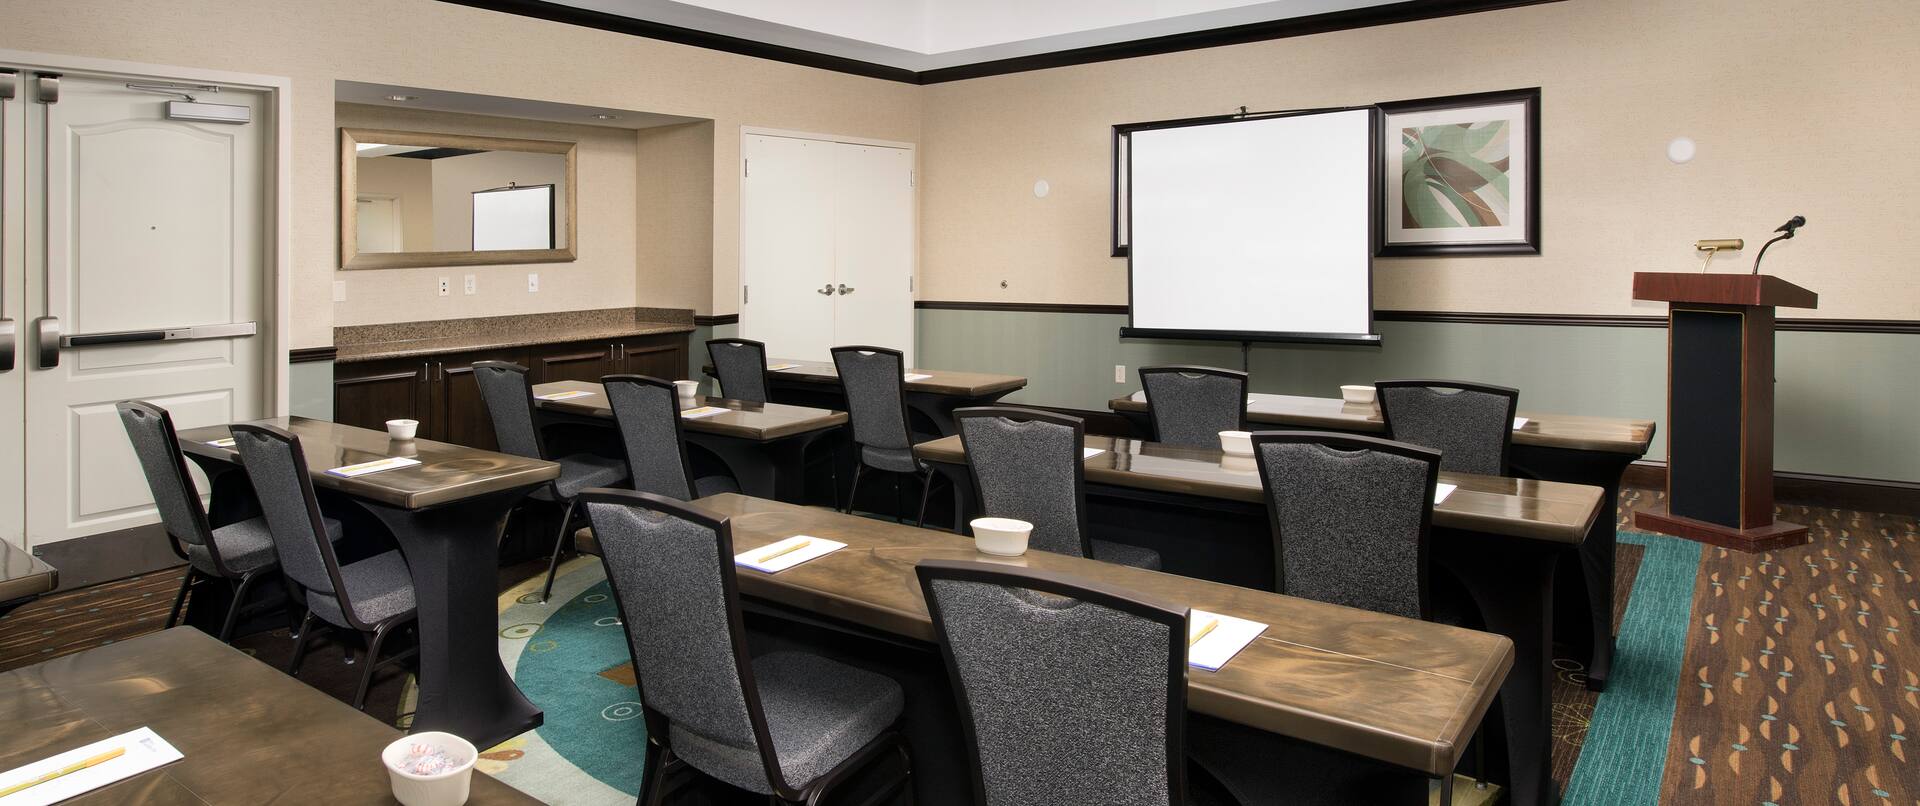 Classroom Style Meeting Room With Tables and Chairs Facing Presentation Screen and Podium